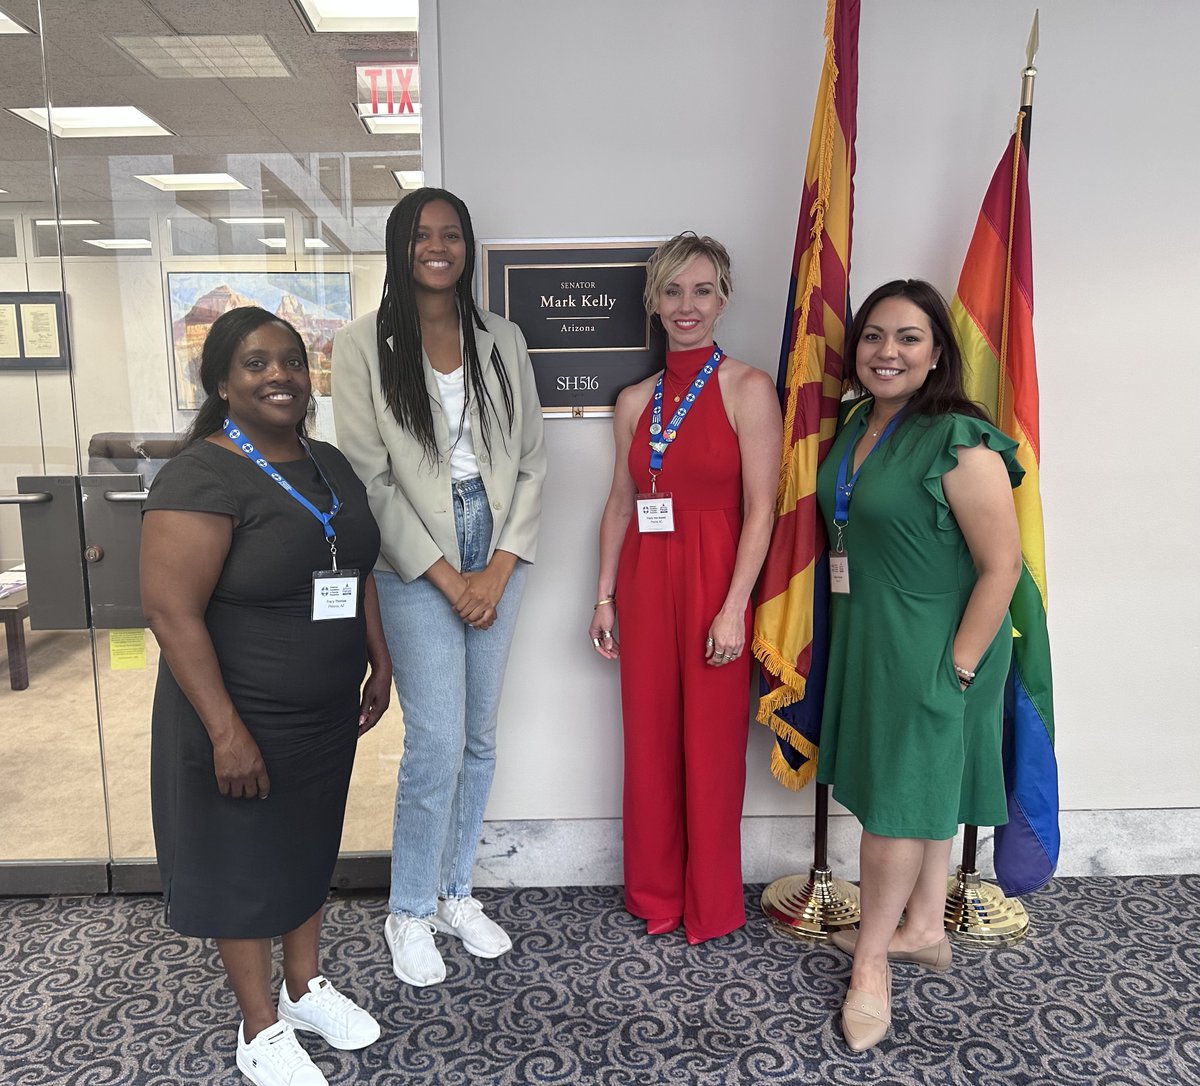 Who joined us in June for the Advocacy Forum?

We were inspired by the passion and determination of our advocates when fighting for @988Lifeline funding, youth suicide prevention, and veteran suicide prevention. #AFSPadvocacy